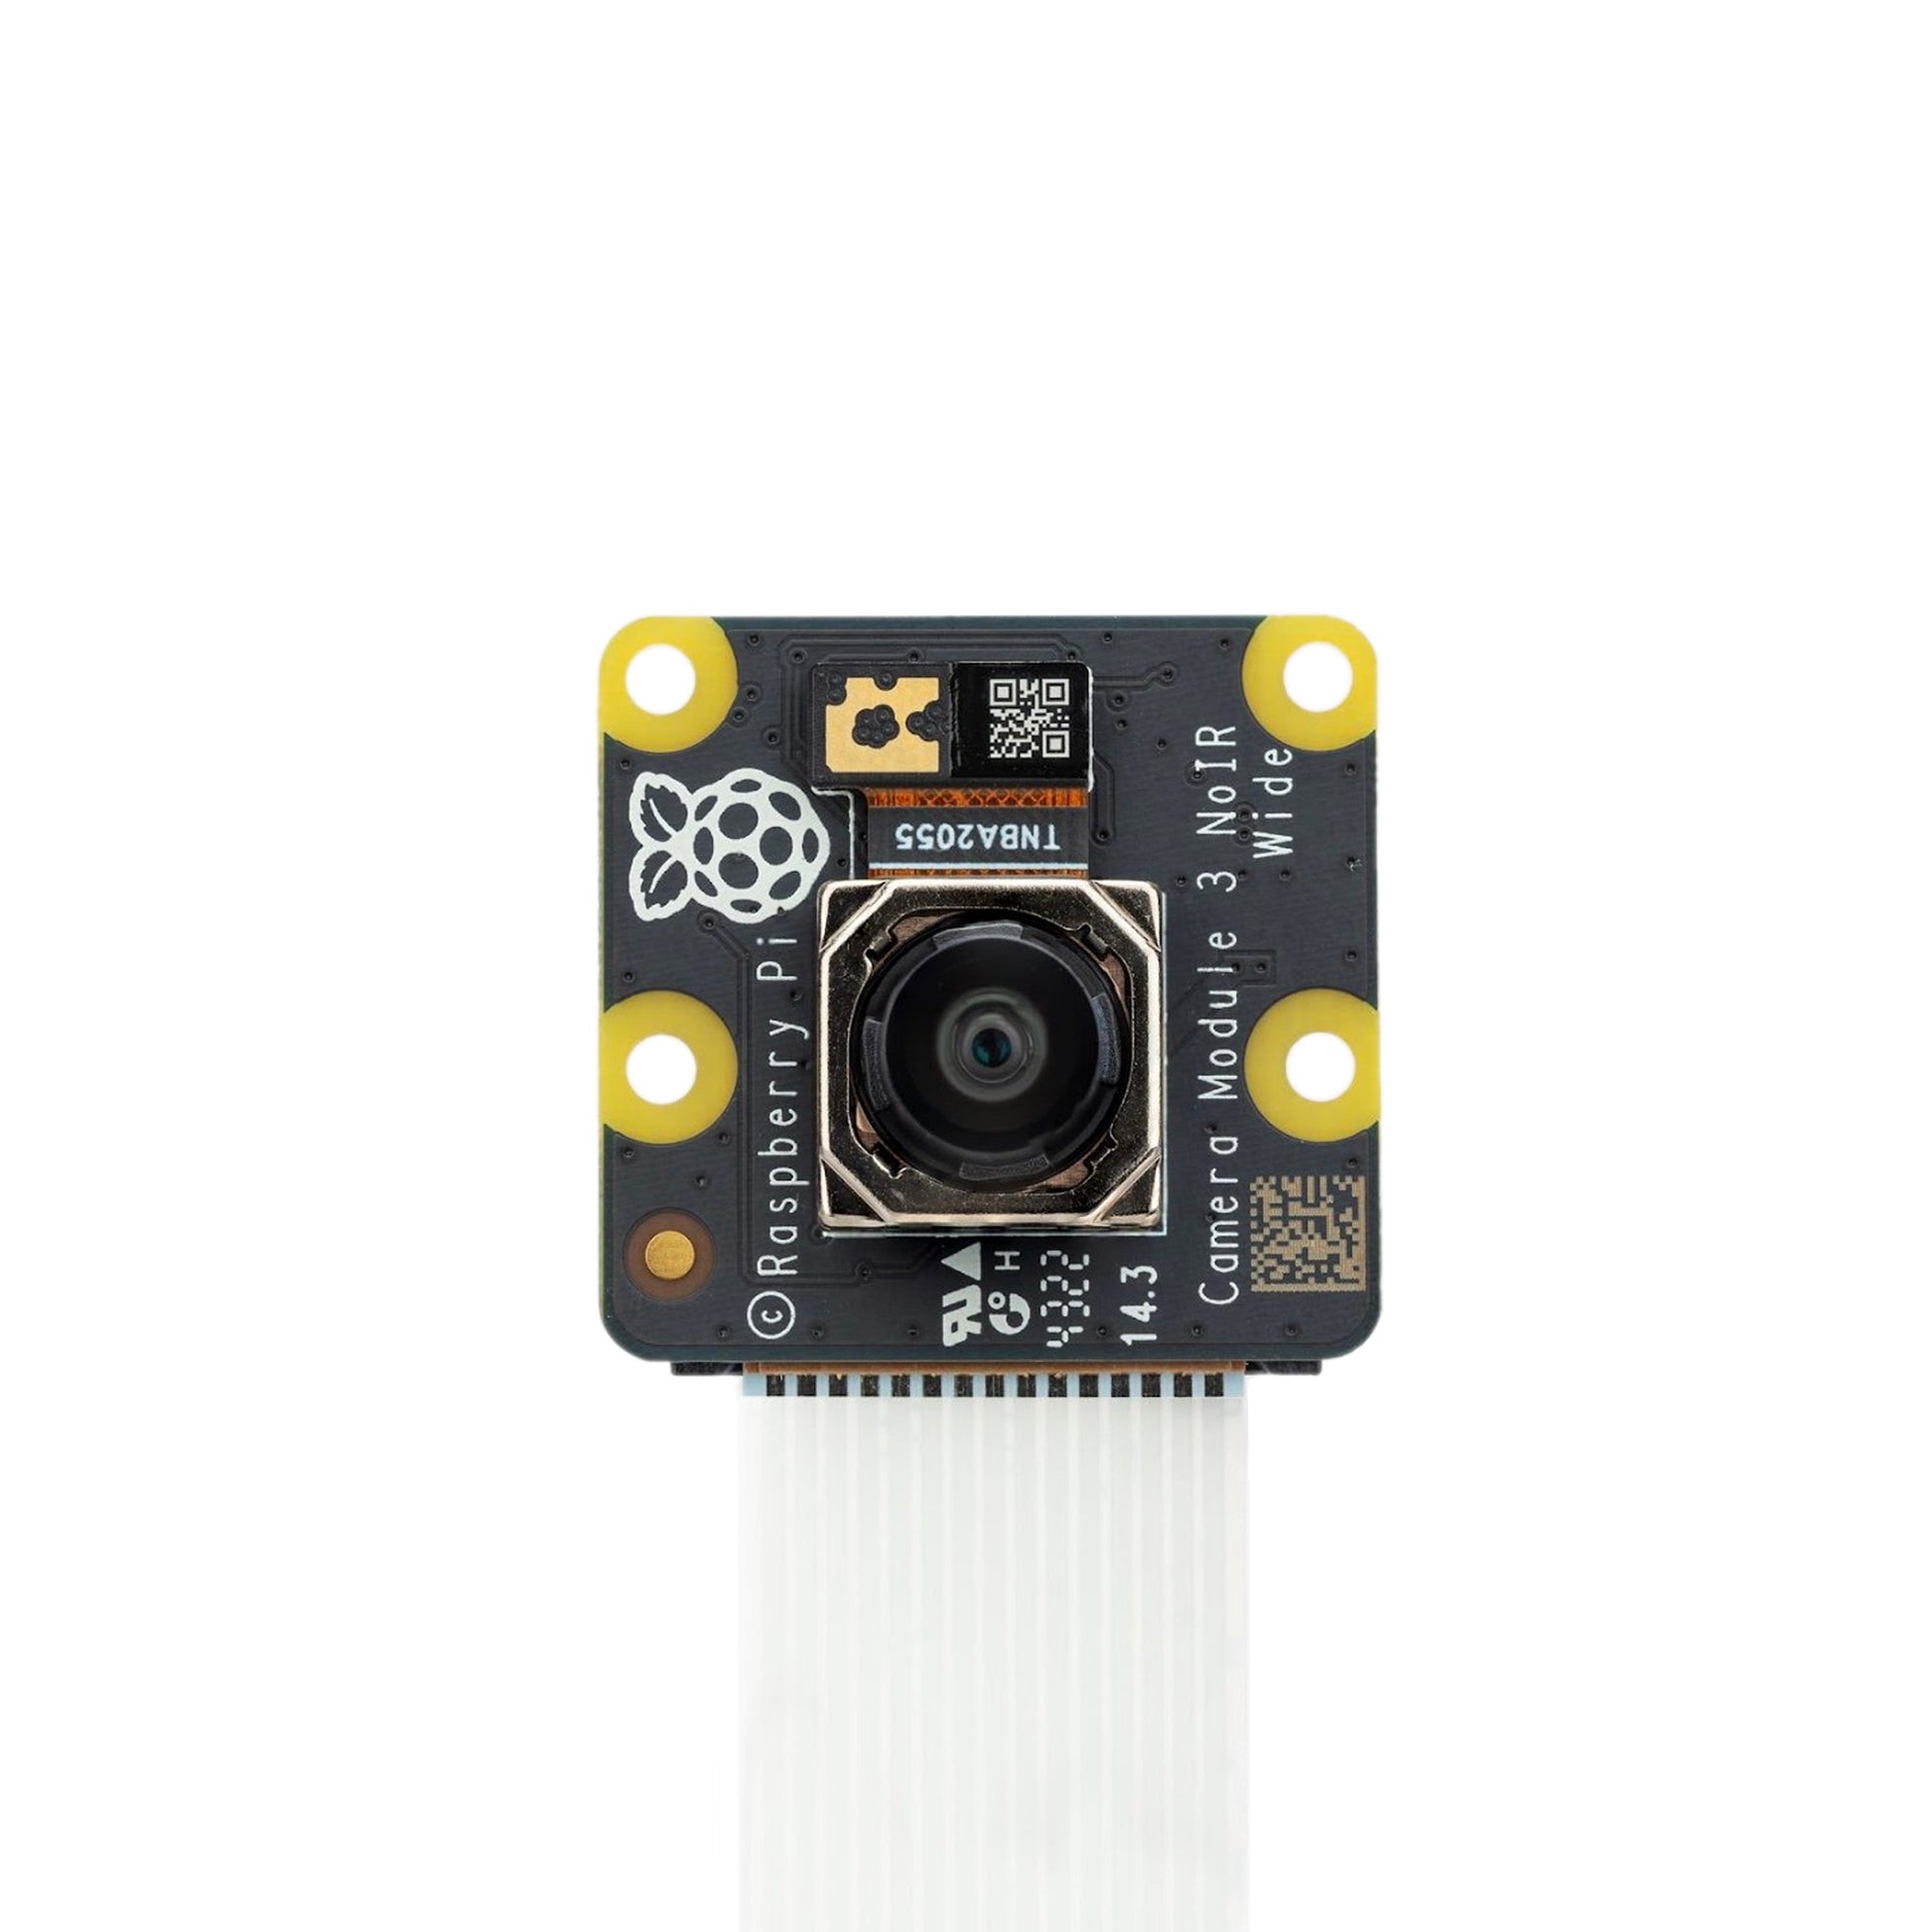 Official Raspberry Pi Camera Module 3 with 75°/ 120° 12mp Sony IMX708 Image Sensor - REES52